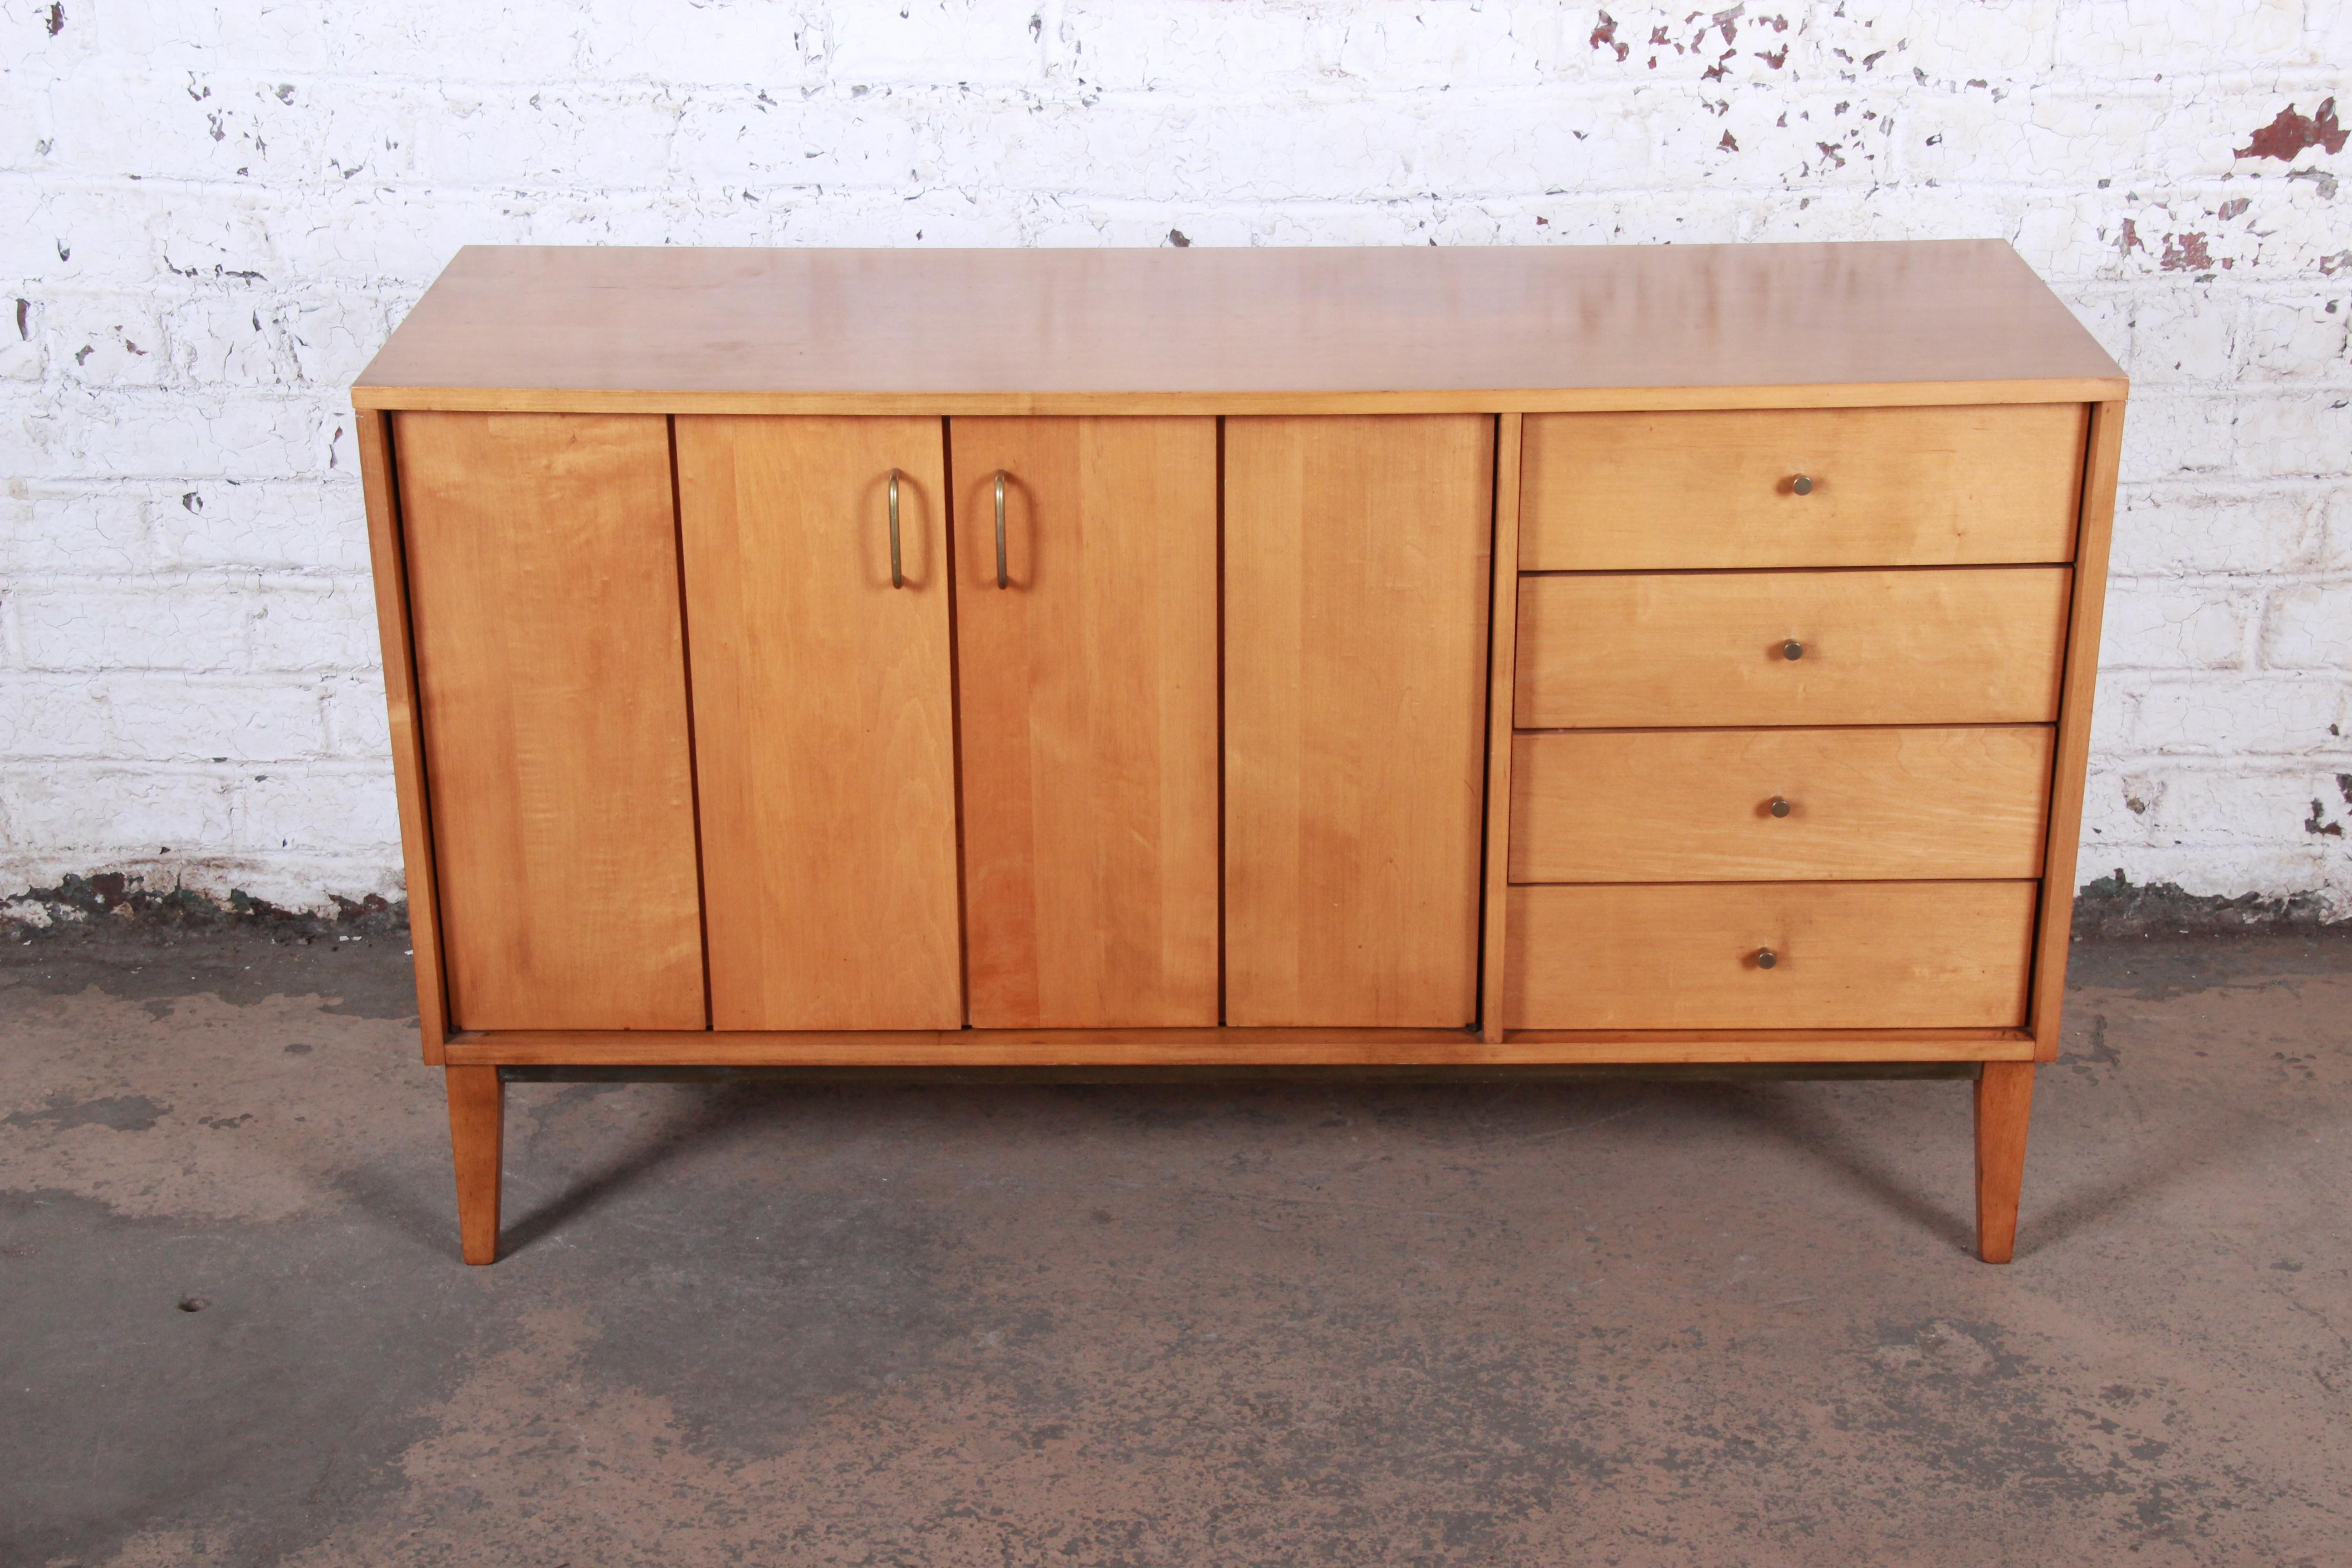 Mid-Century Modern maple sideboard credenza

Designed by Milo Baughman for Murray

USA, 1950s

Maple and brass

Measures: 54